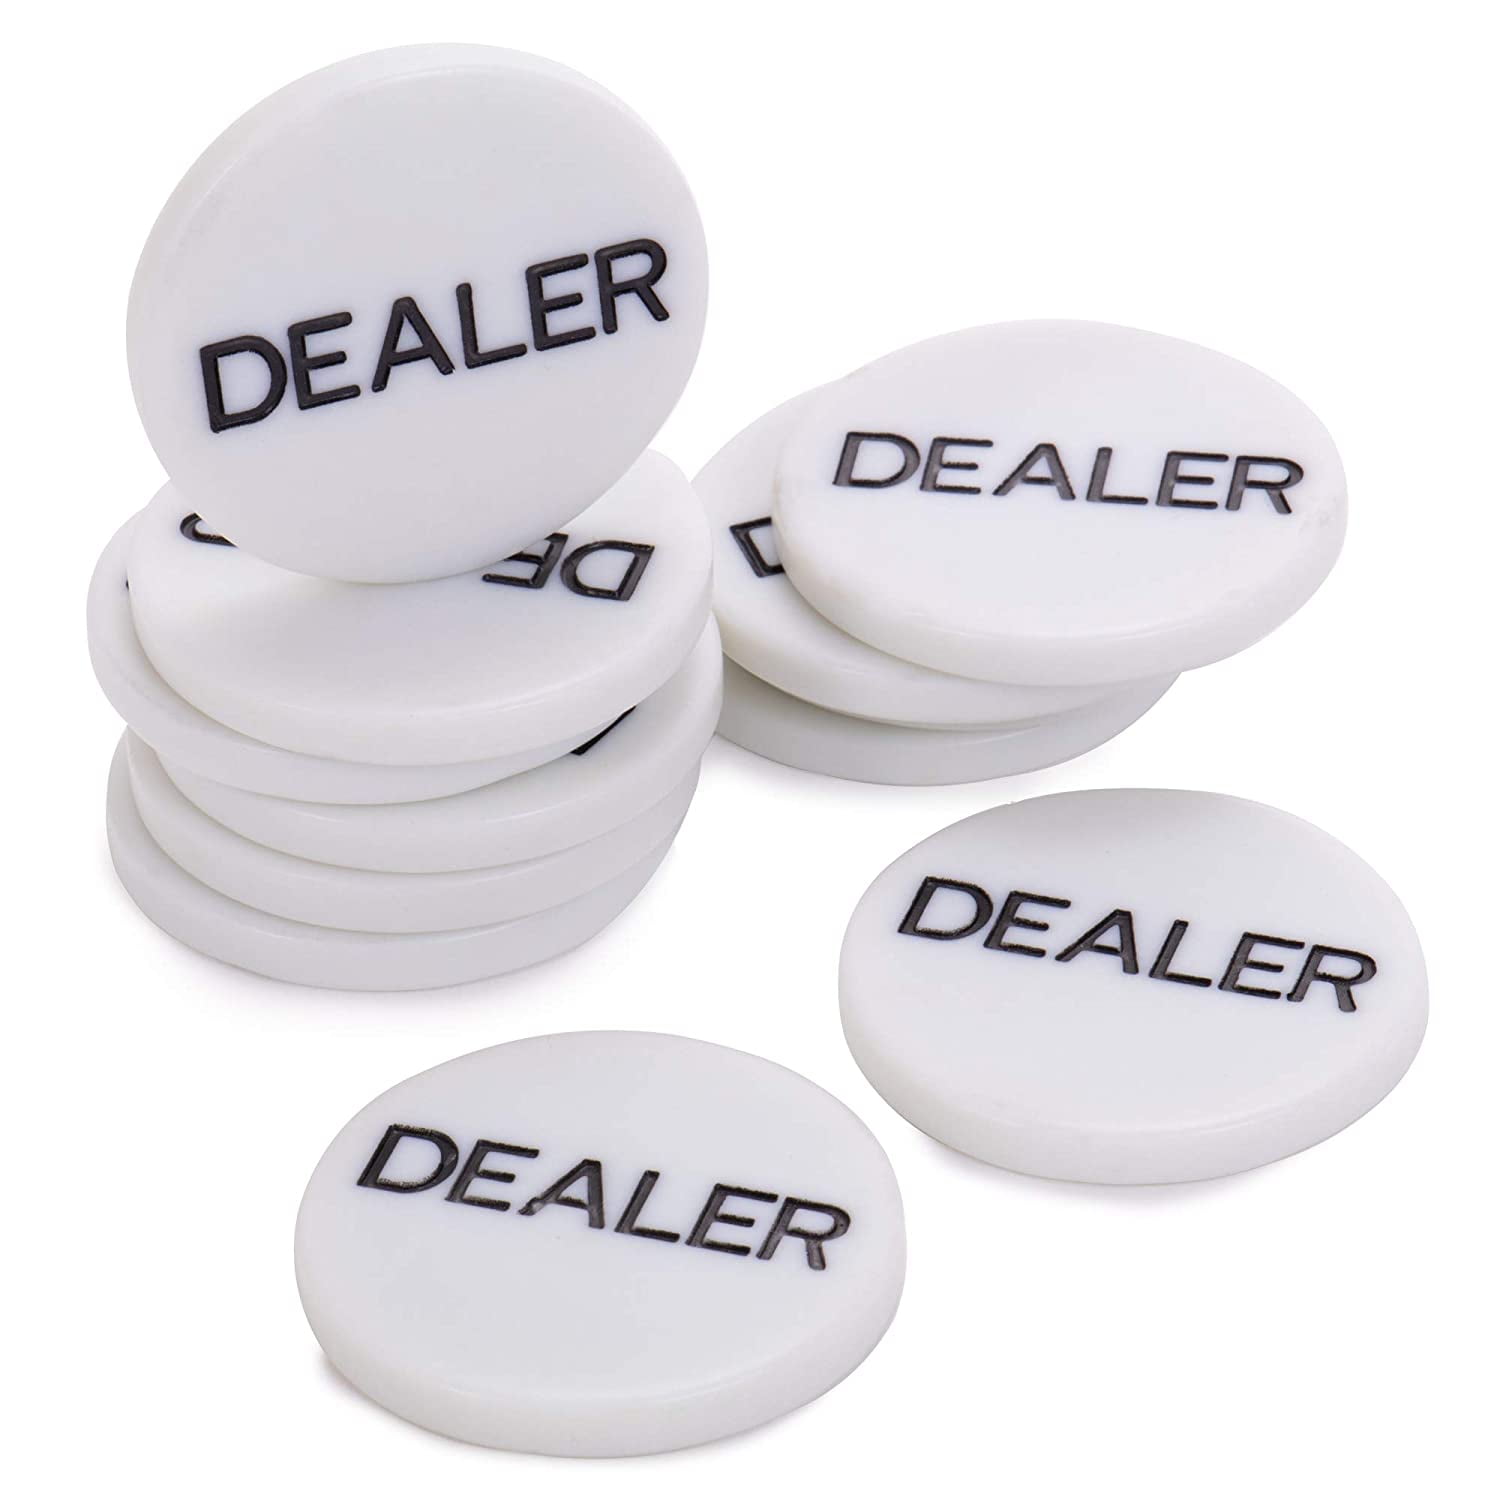 Transparent Blue Acrylic Dealer Button for Poker Card Casino Game Parts 